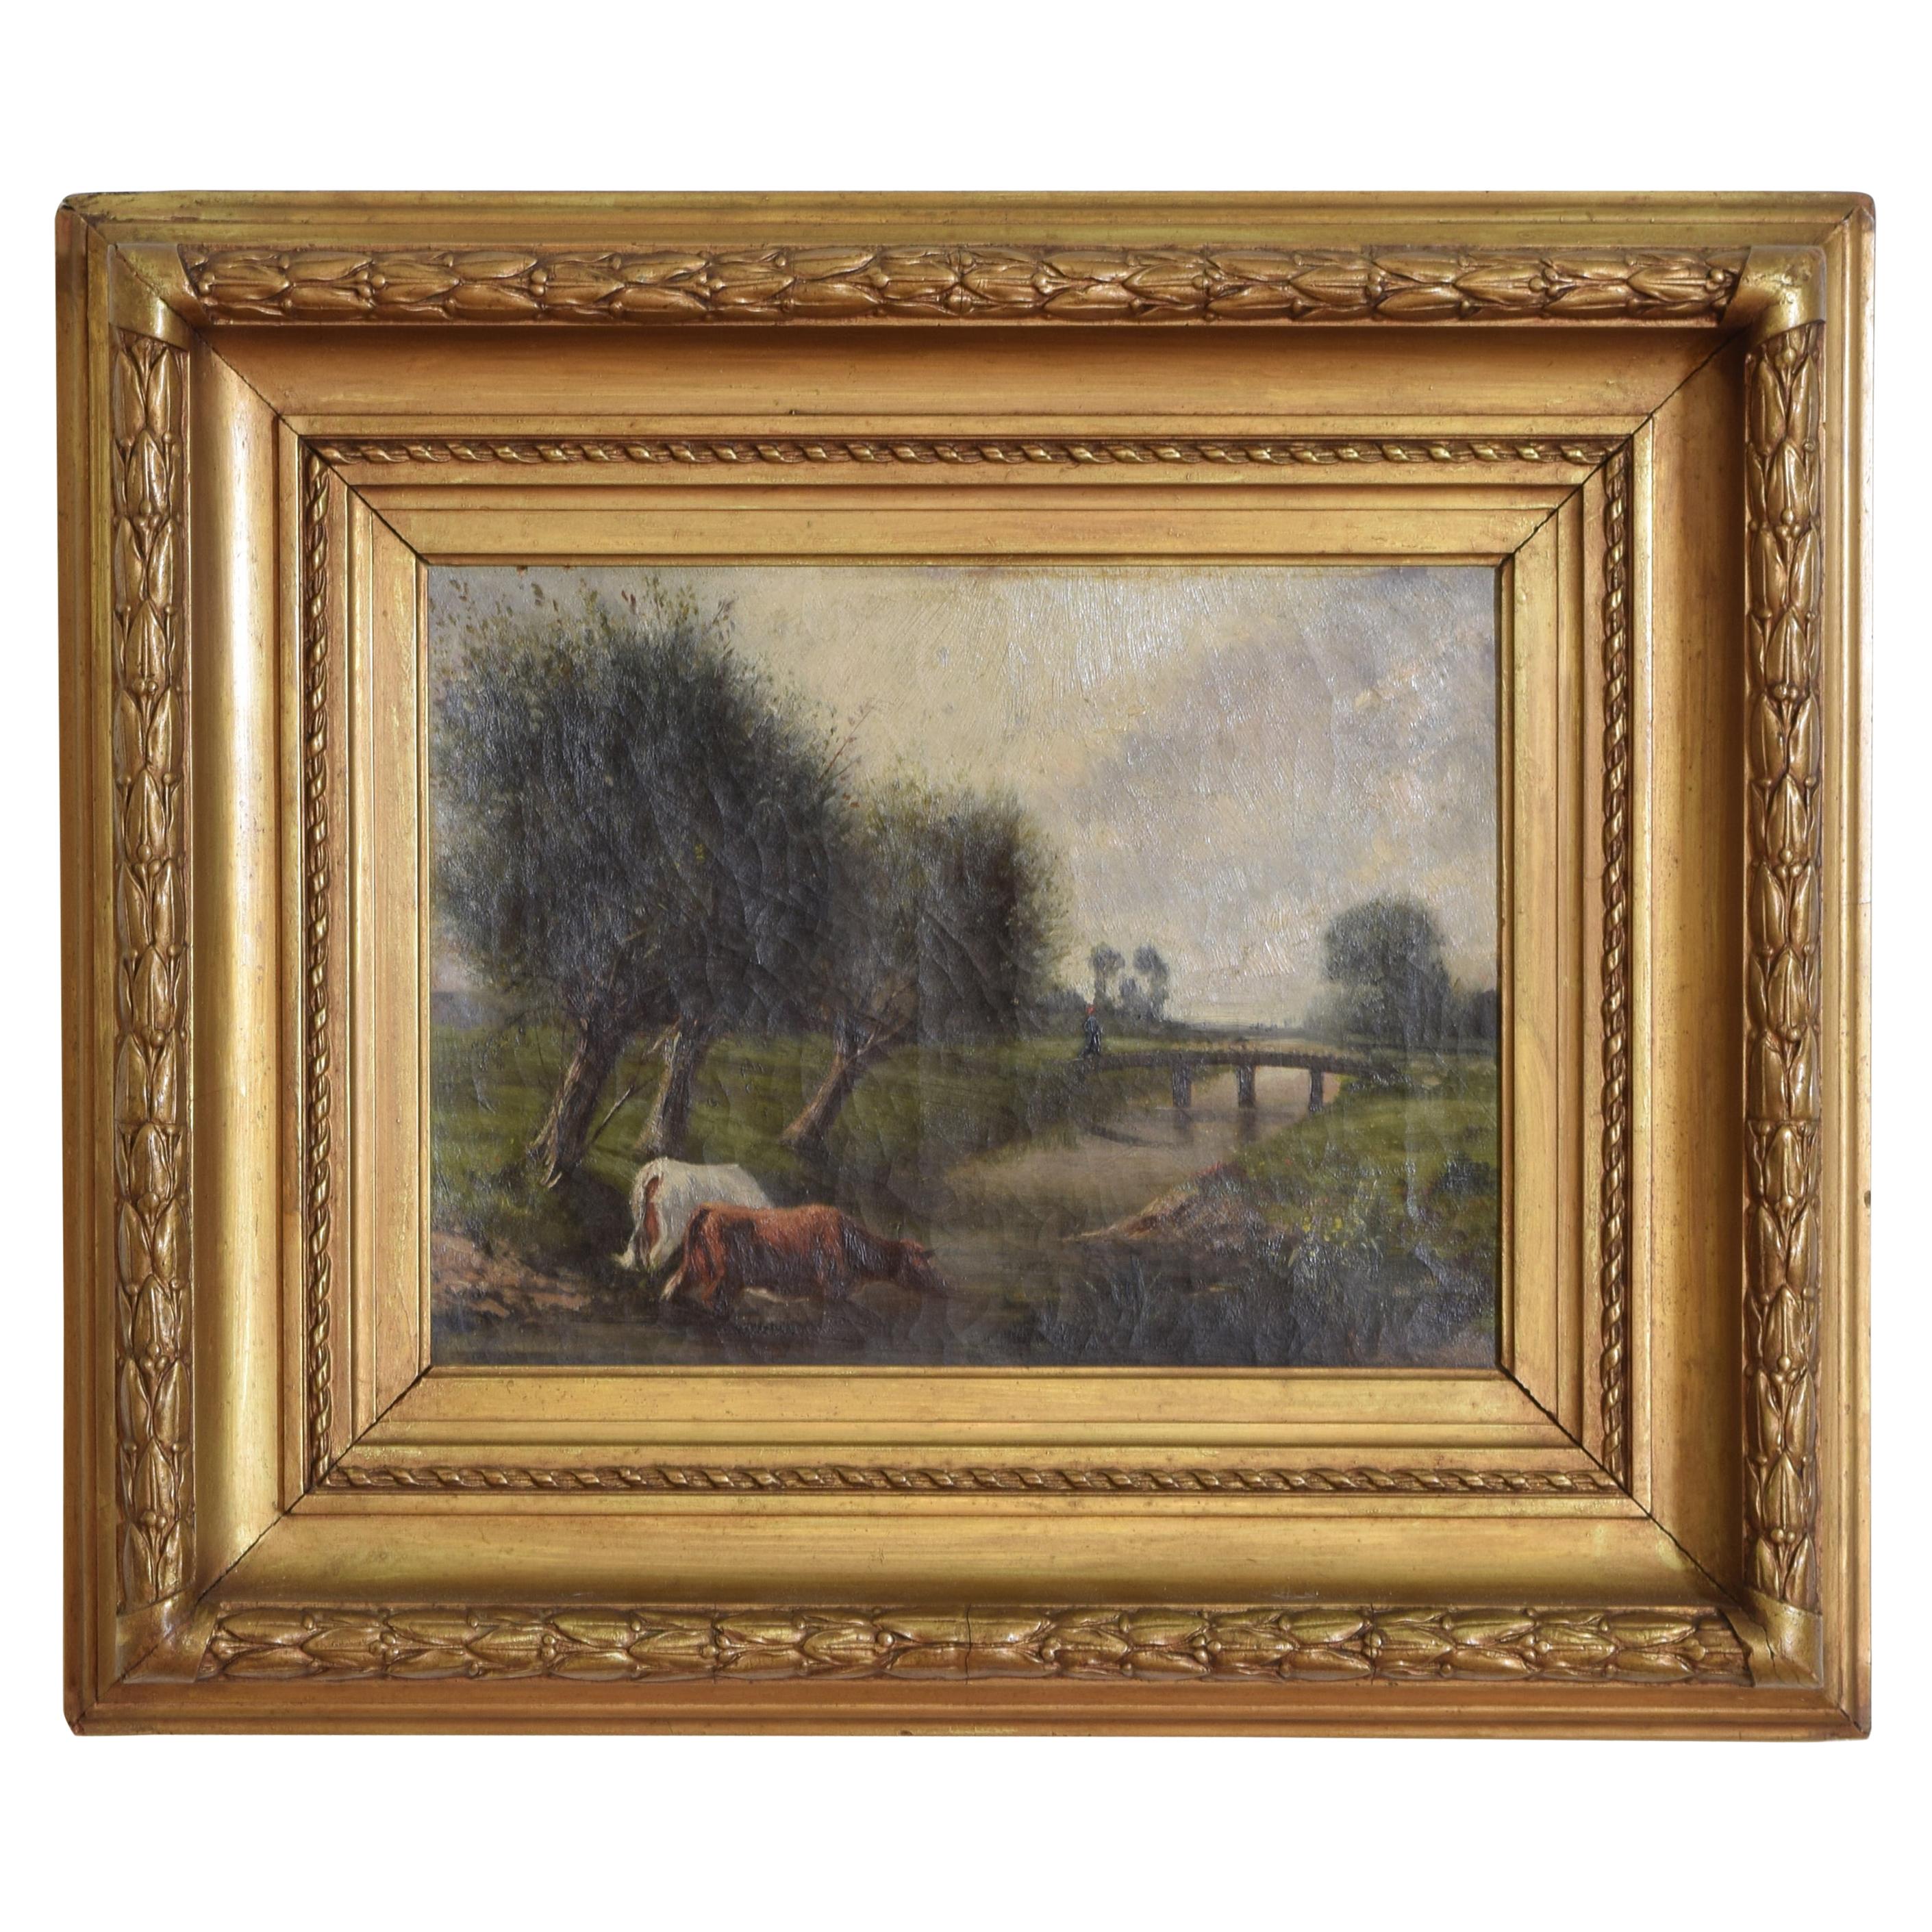 Continental Oil on Canvas, Cows Grazing at River, 19th Century